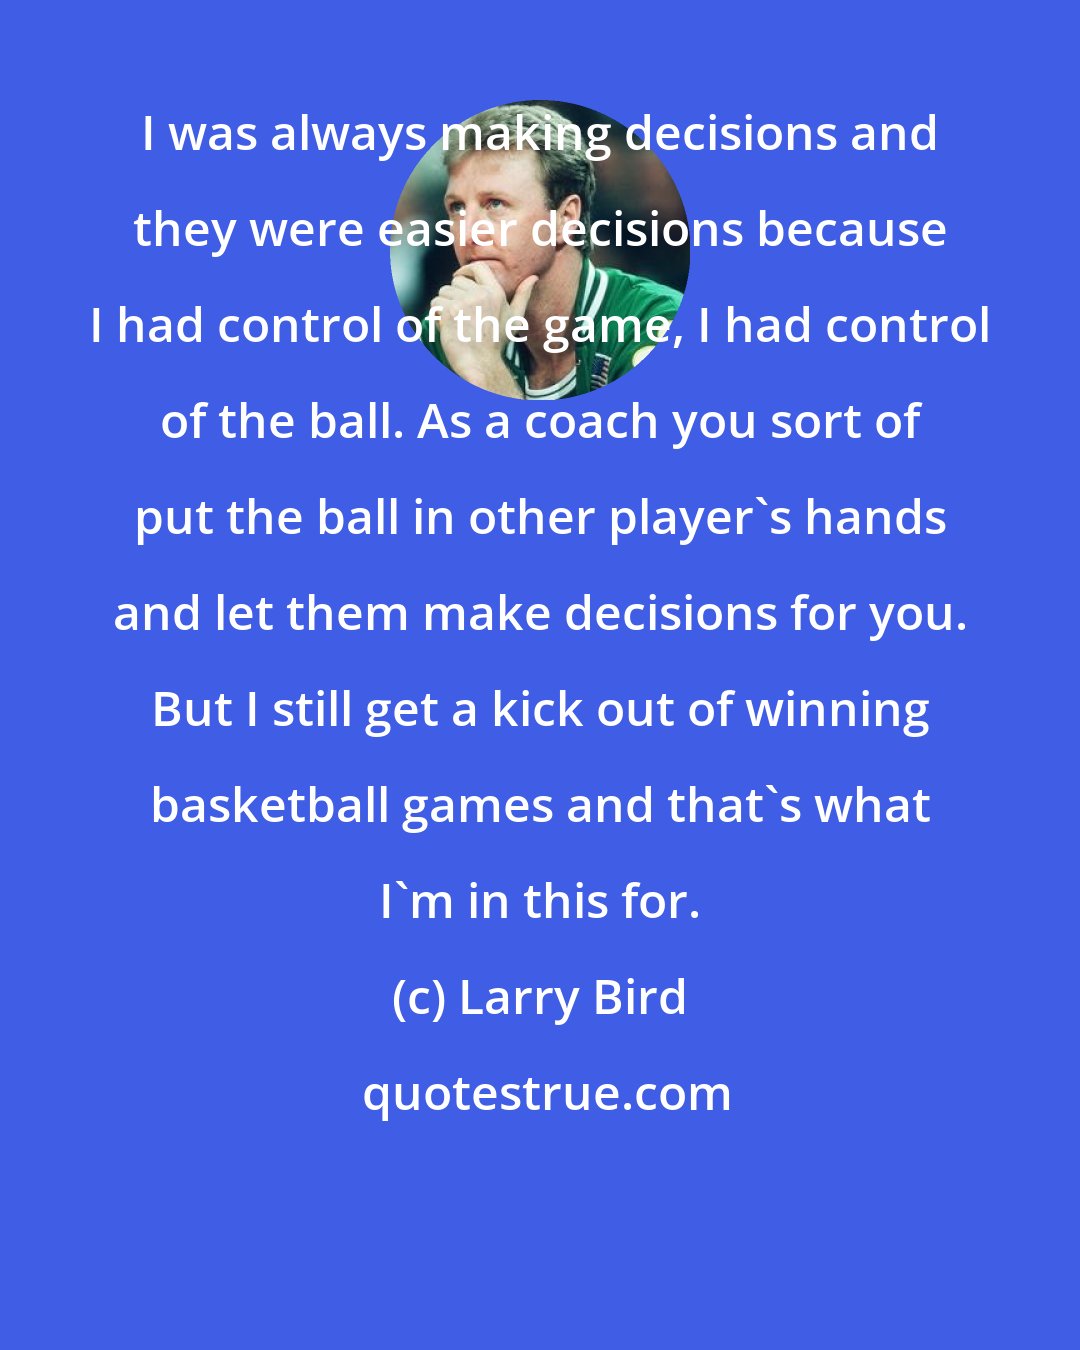 Larry Bird: I was always making decisions and they were easier decisions because I had control of the game, I had control of the ball. As a coach you sort of put the ball in other player's hands and let them make decisions for you. But I still get a kick out of winning basketball games and that's what I'm in this for.